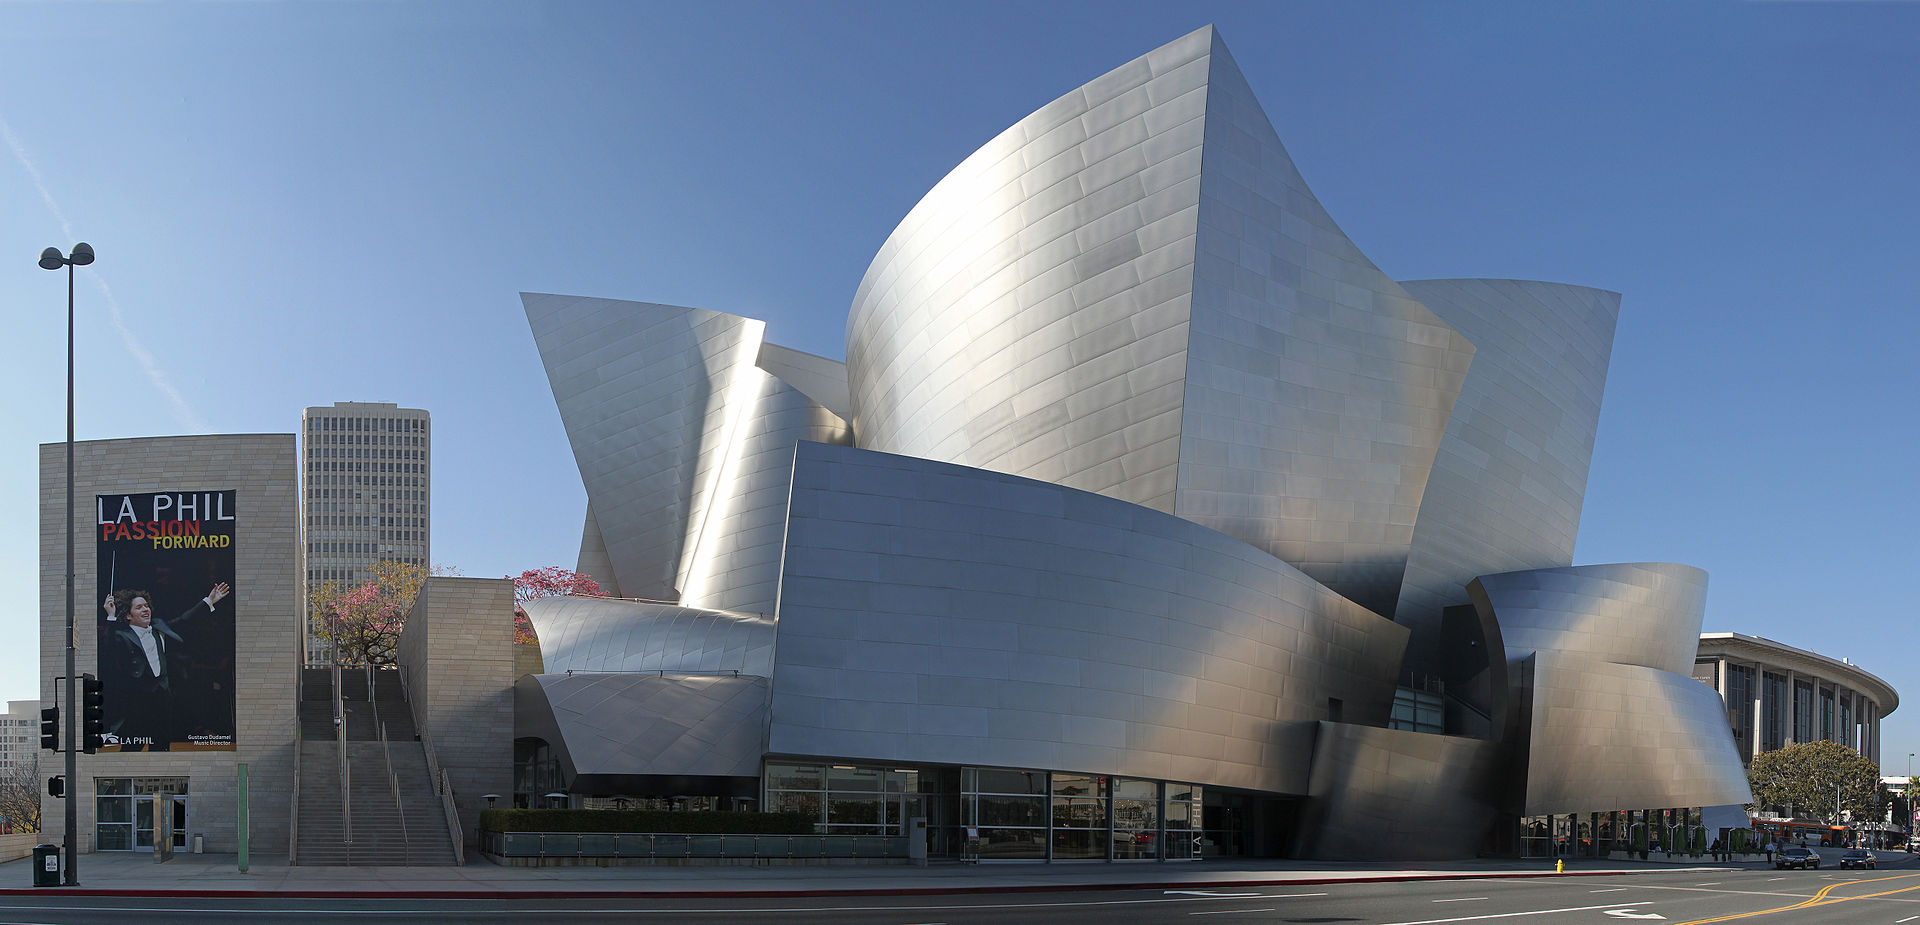 Image showing stainless steel cladding on Walt Disney Concert Hall.